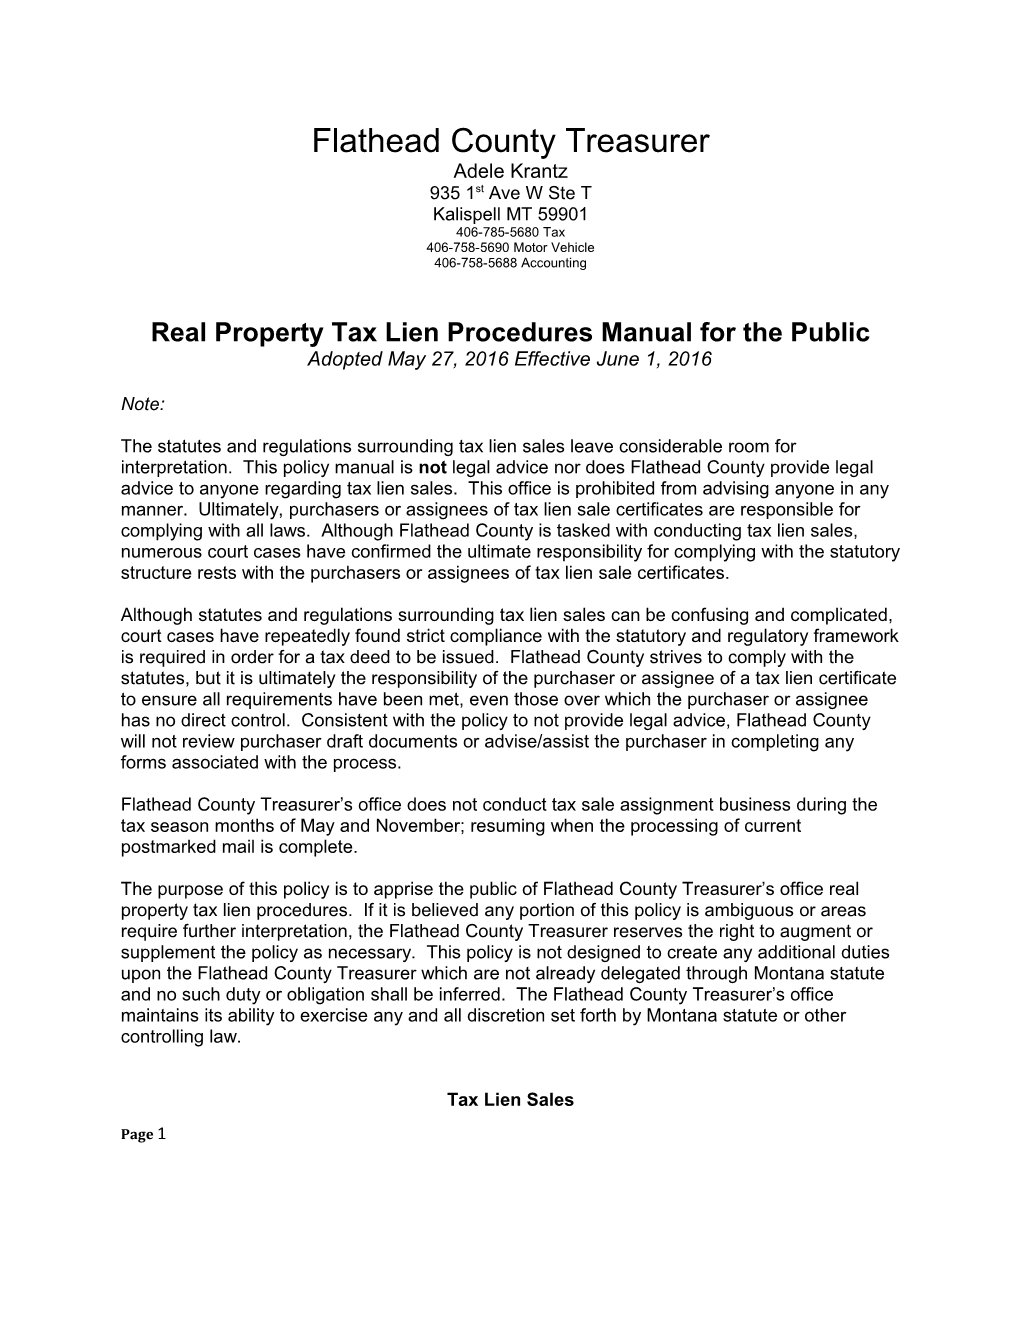 Real Property Tax Lien Procedures Manual for the Public